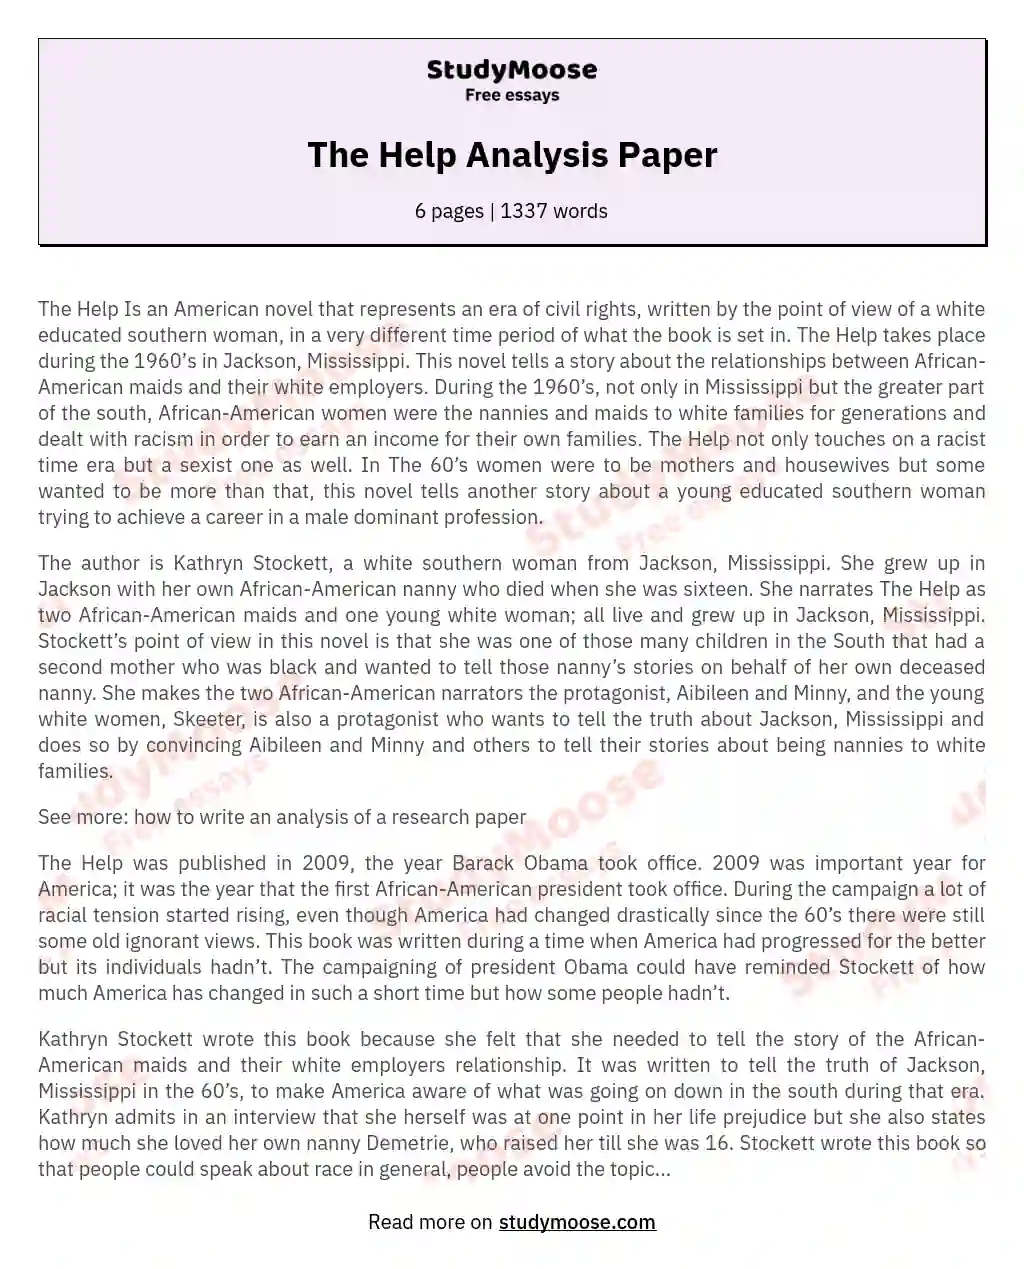 The Help Analysis Paper essay